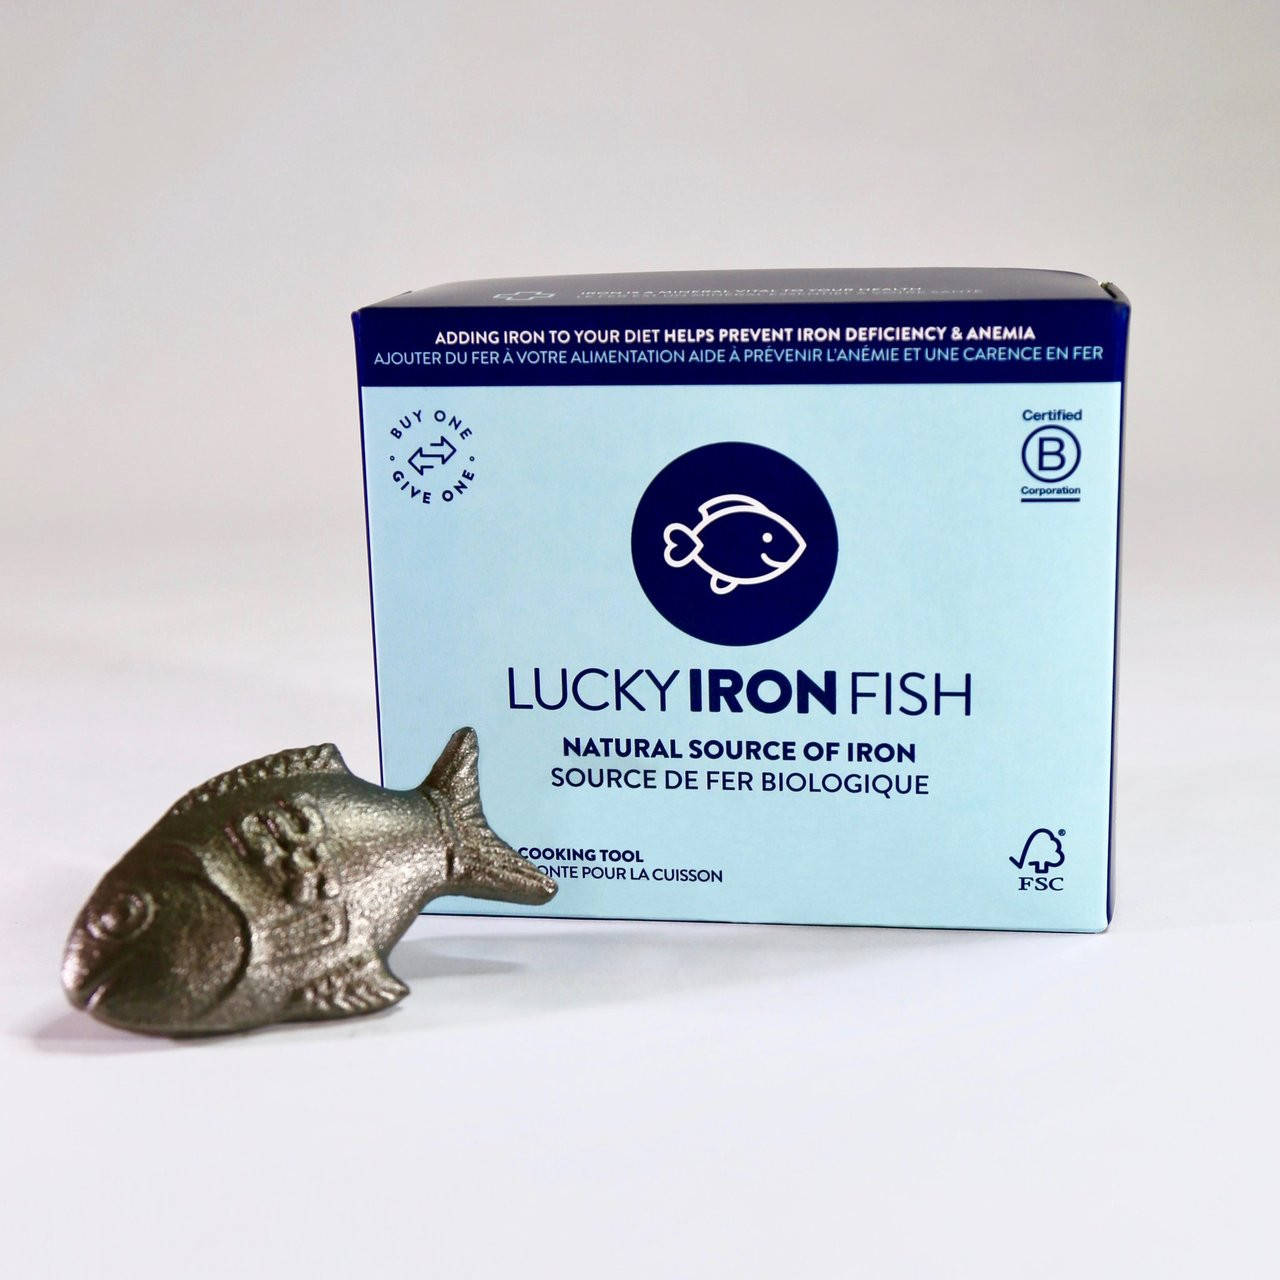 Kitchen gadget review: Lucky Iron Fish – I call this health tool